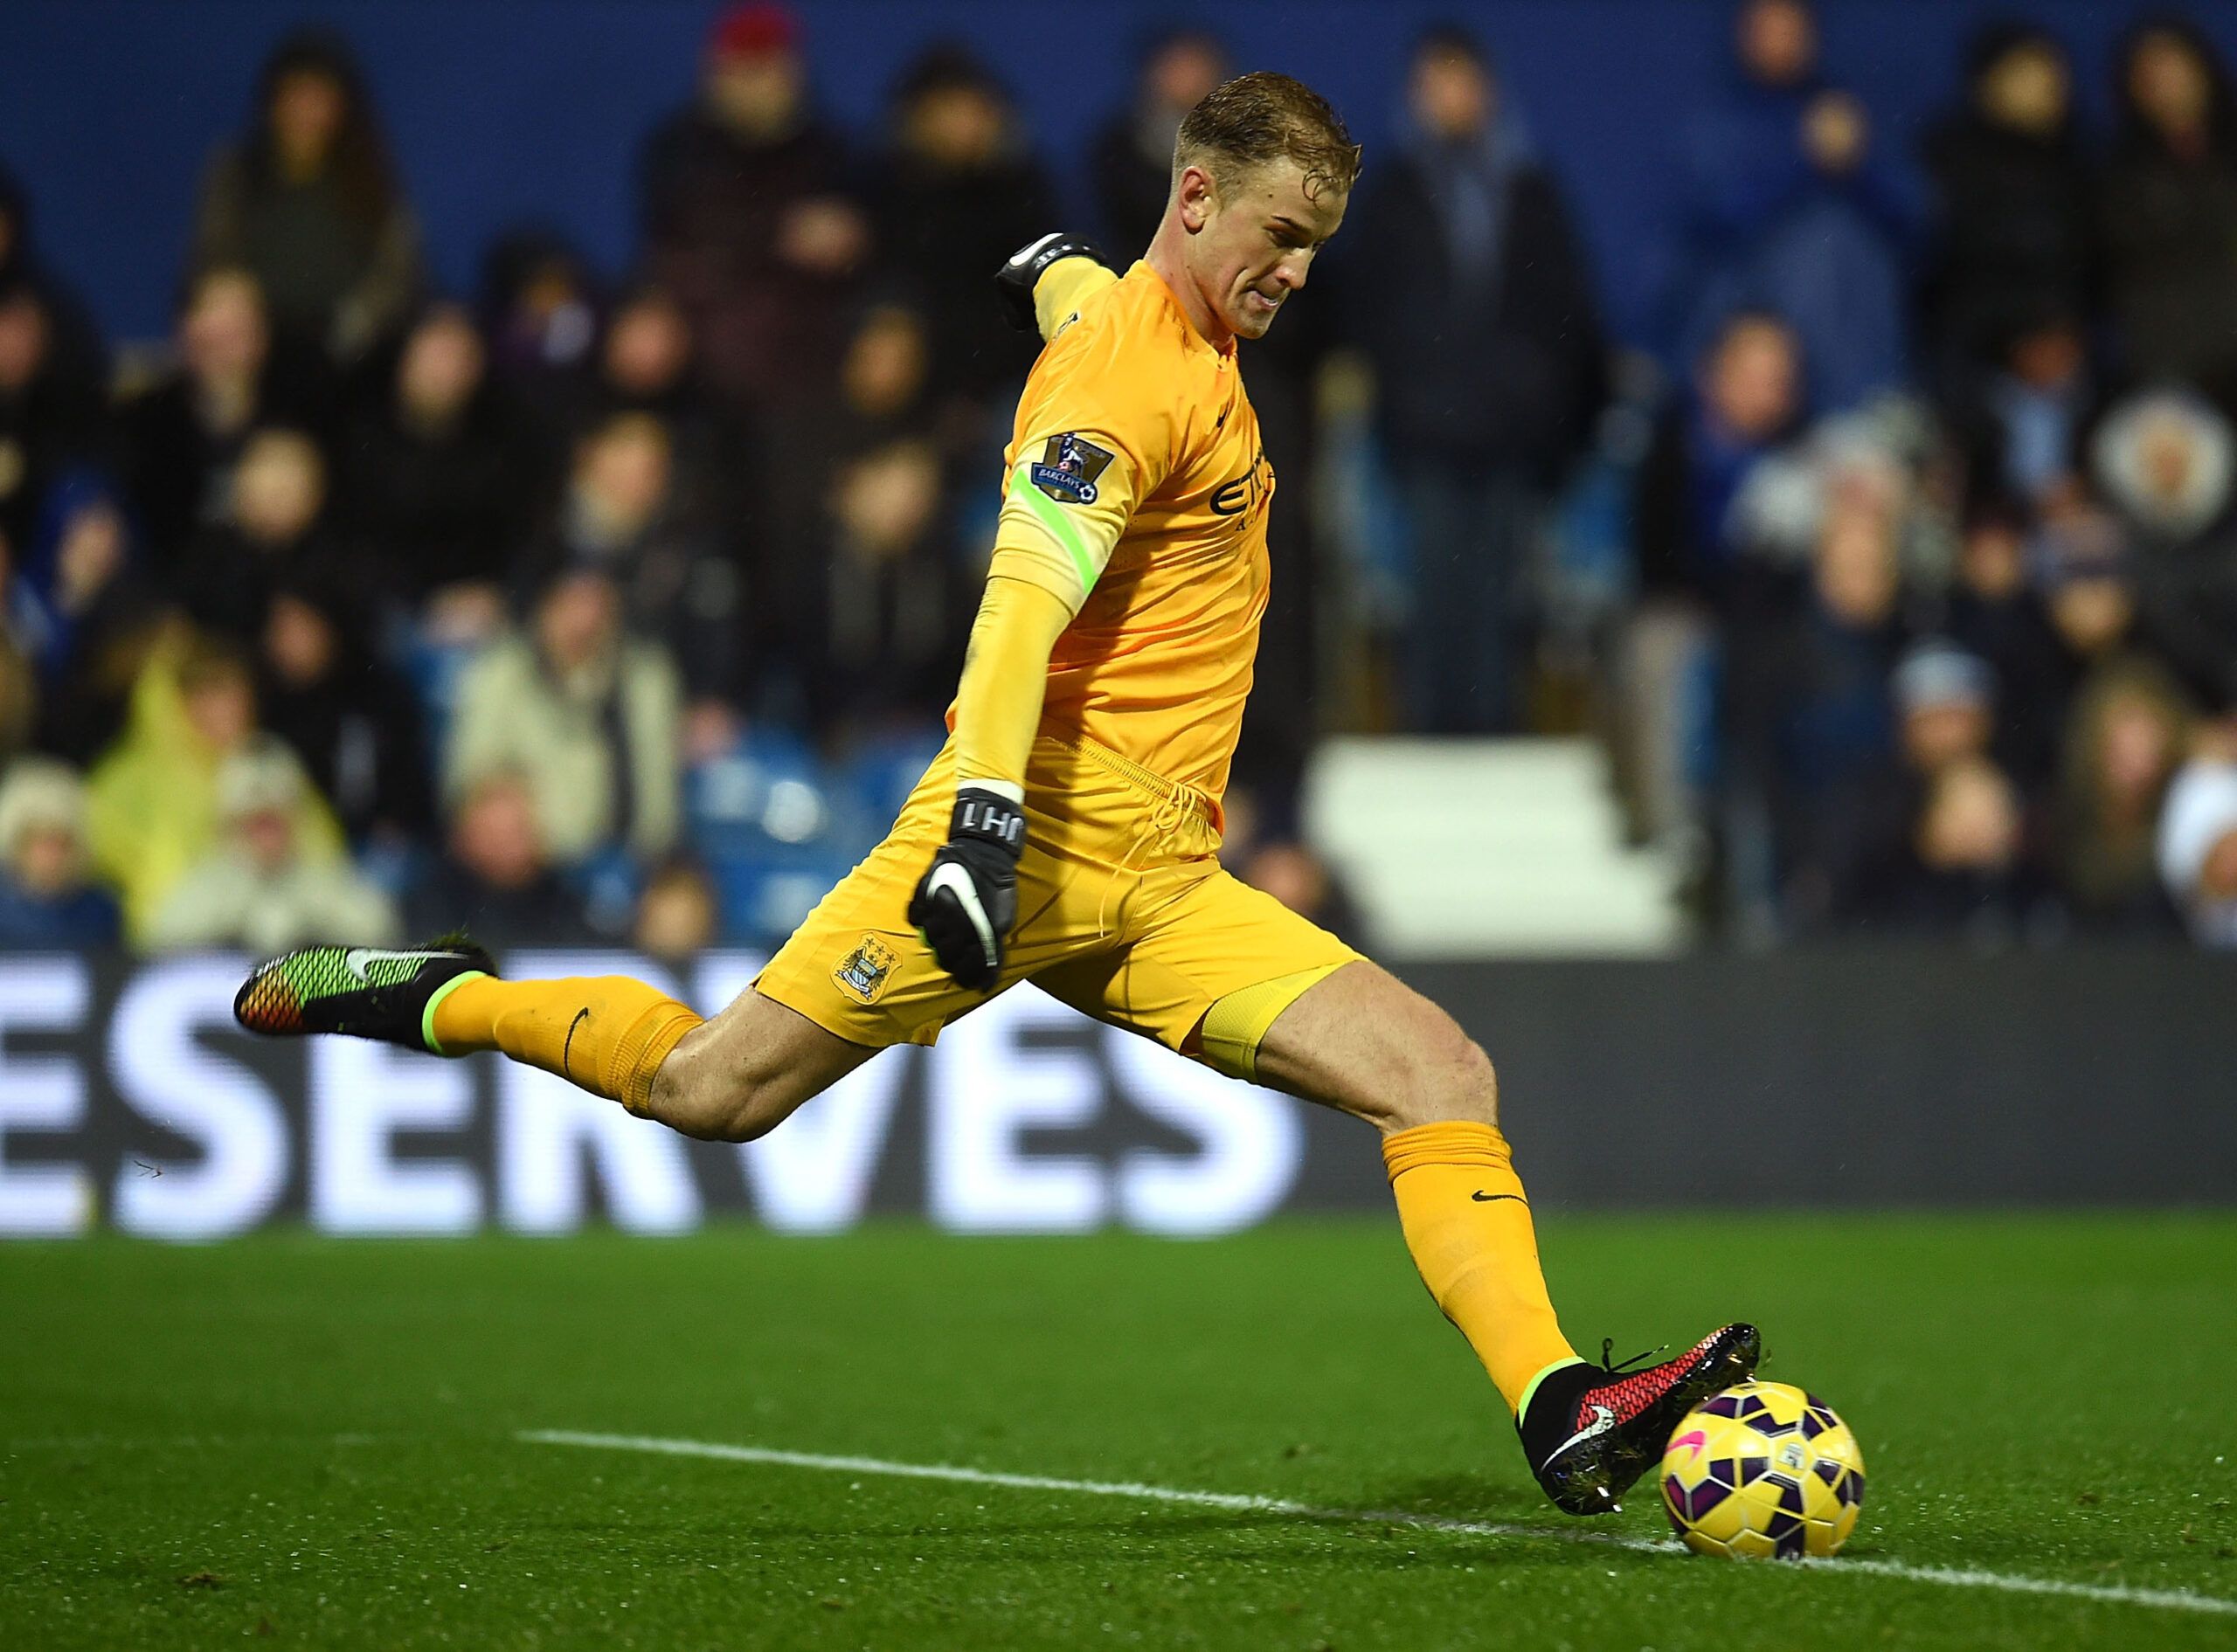 Joe Hart in action for Manchester City